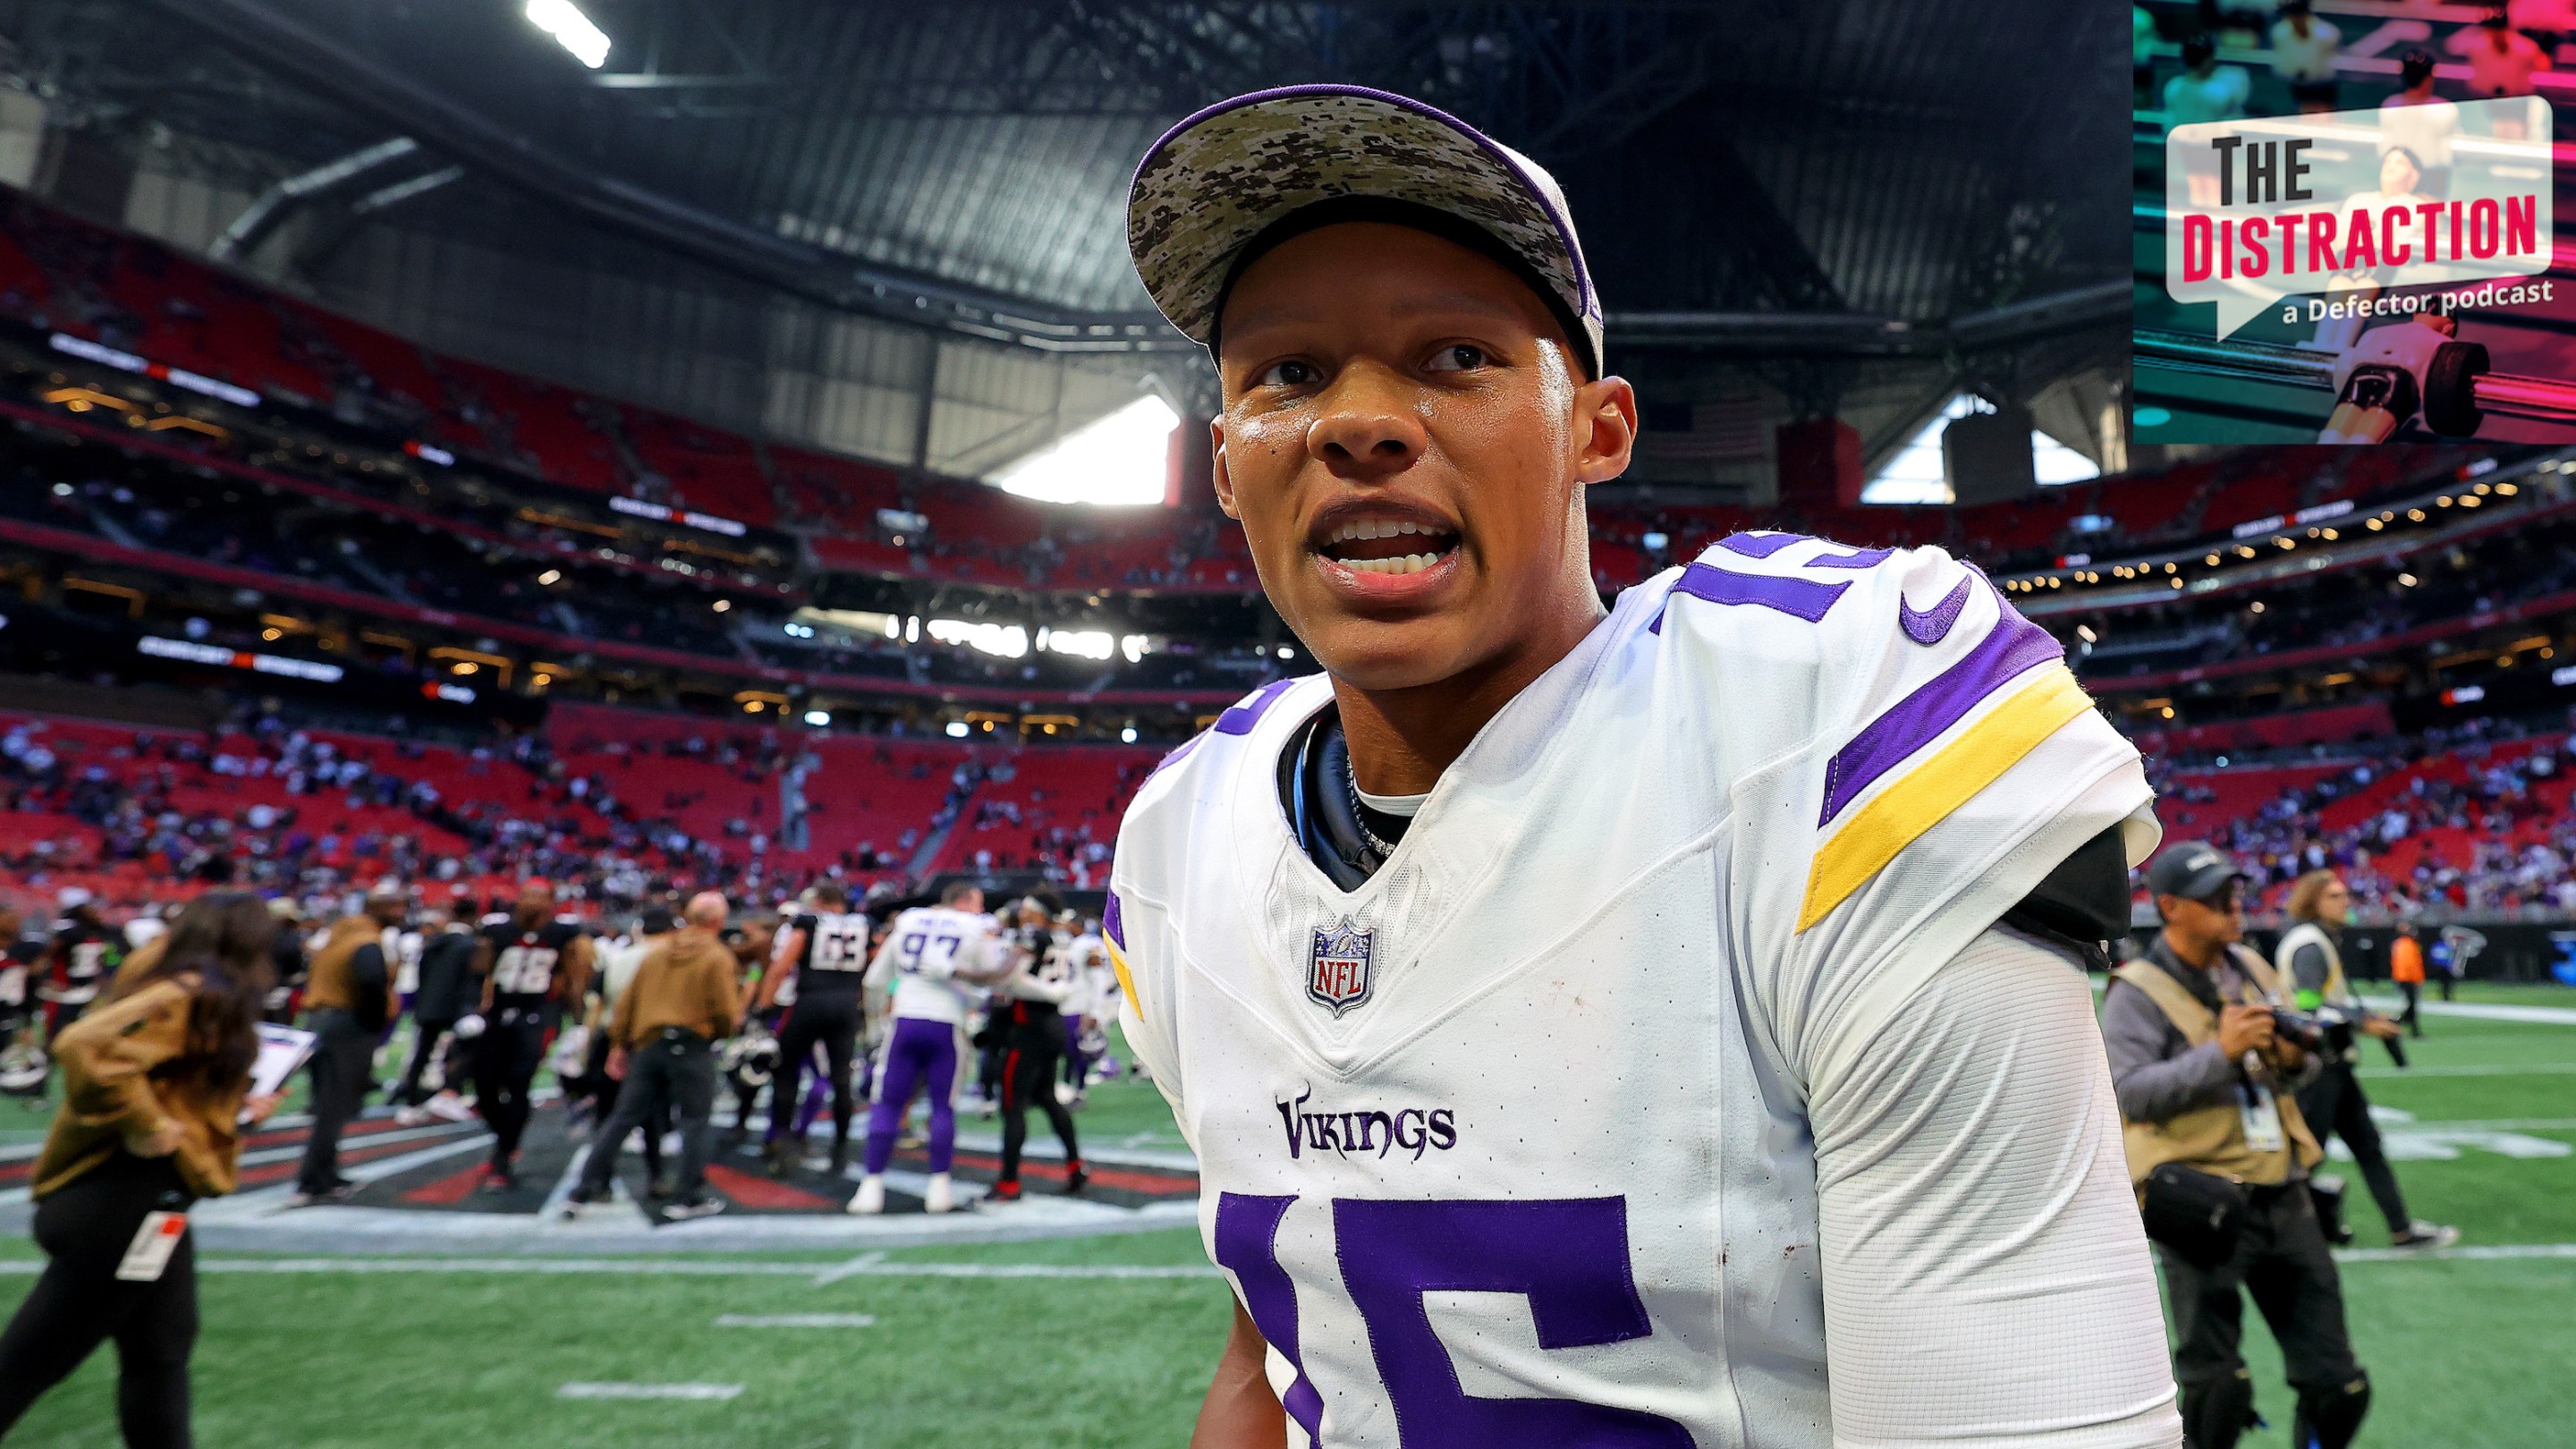 New Vikings quarterback Joshua Dobbs exults after leading his team to a comeback win against the Falcons in Atlanta.